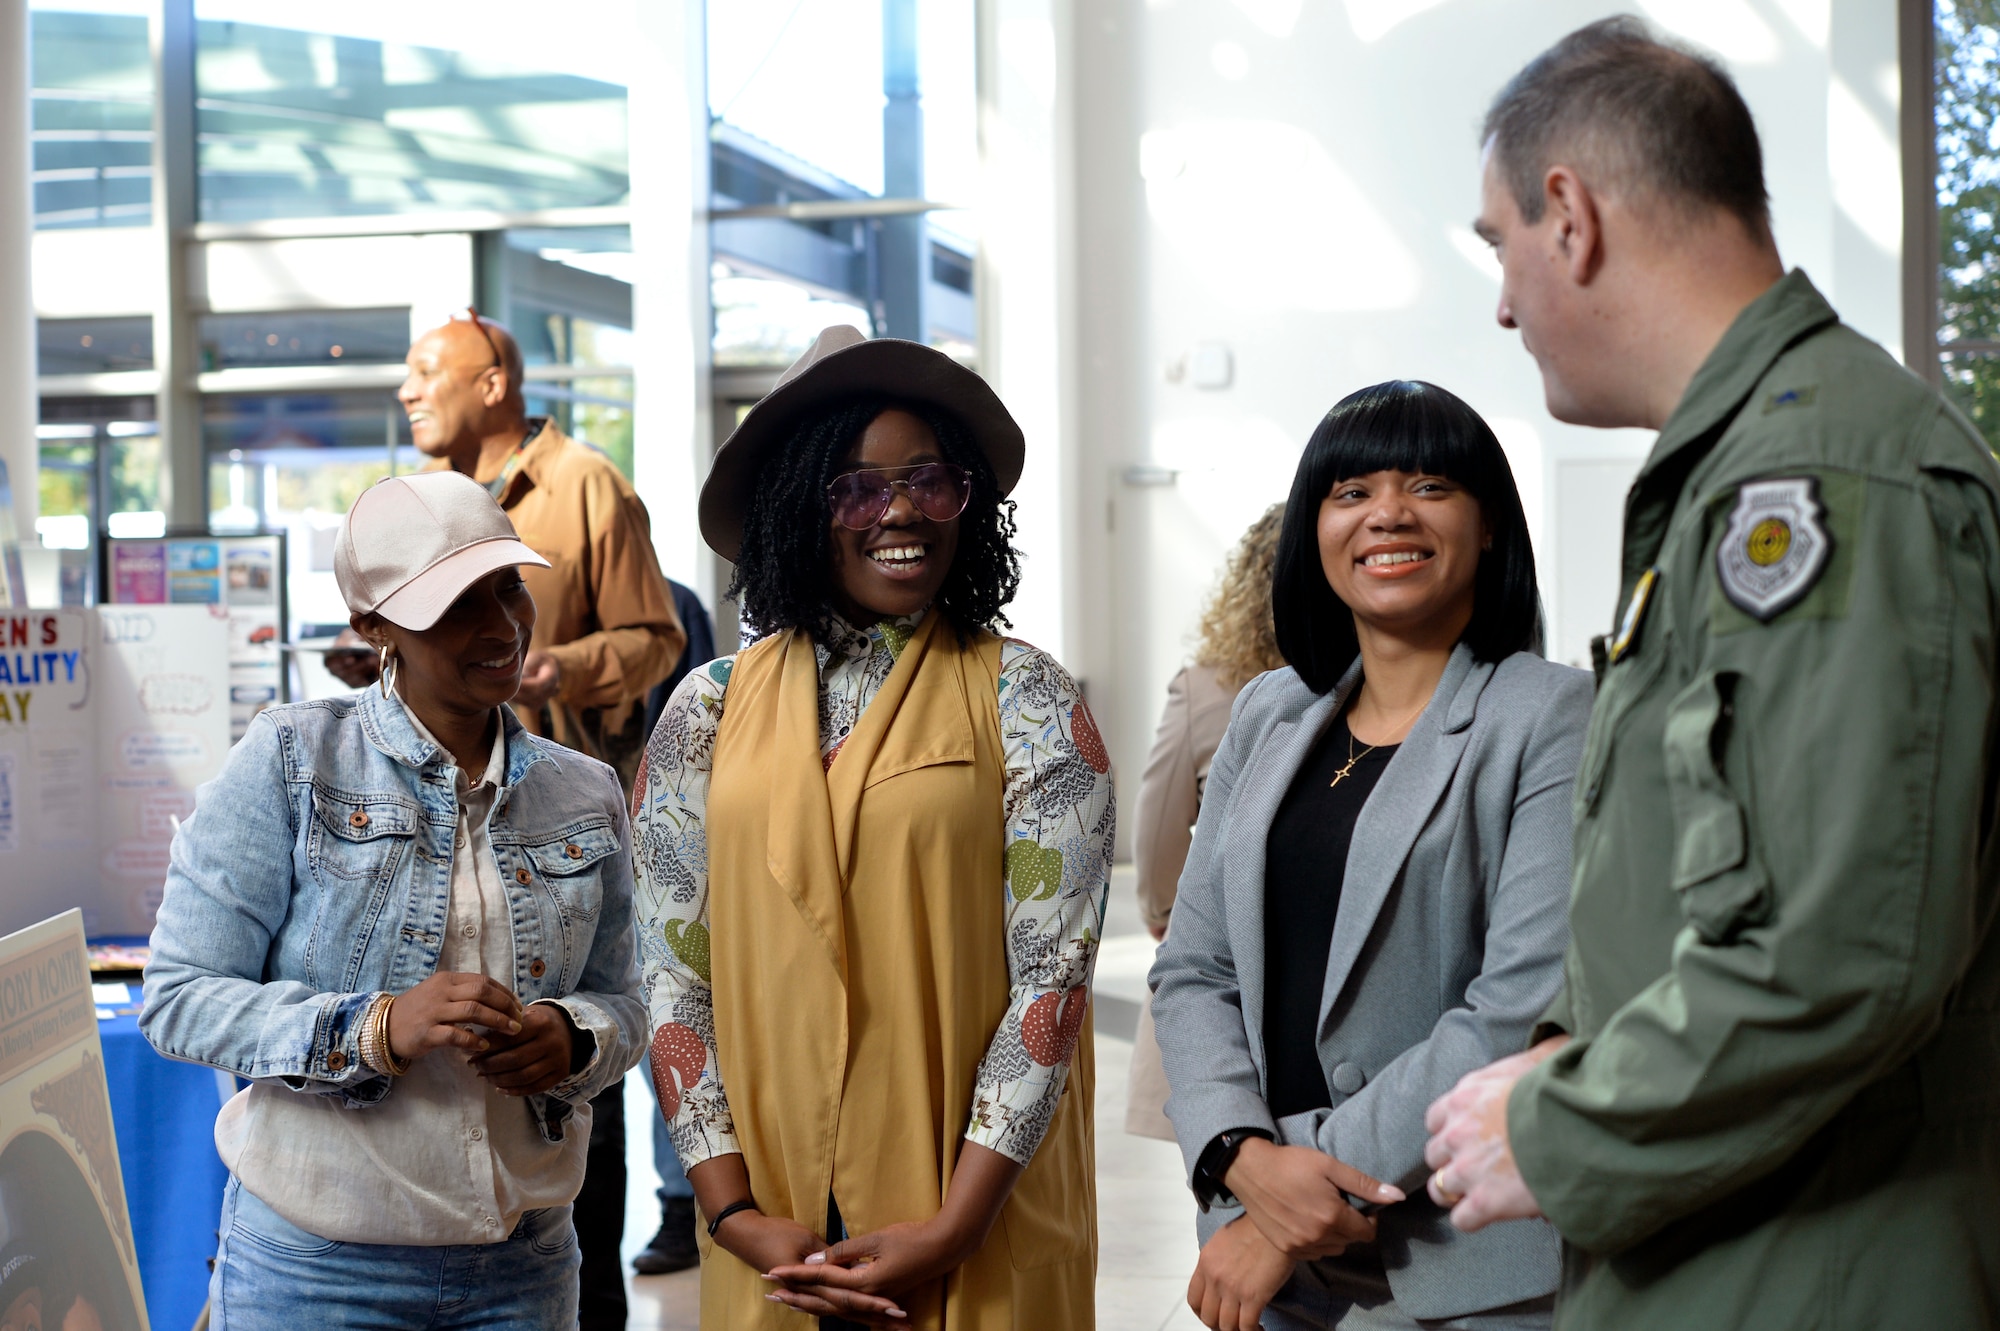 Kaiserslautern Military Community members speak with Brig. Gen. Mark R. August, 86th Airlift Wing commander at the 86th AW’s Diversity Day on Ramstein Air Base, Sept. 28, 2018. The event aimed to enhance cross-cultural and cross-gender awareness while promoting harmony among all military members, their families, and the DOD civilian workforce. (U.S. Air Force photo by Staff Sgt. Nesha Humes Stanton)